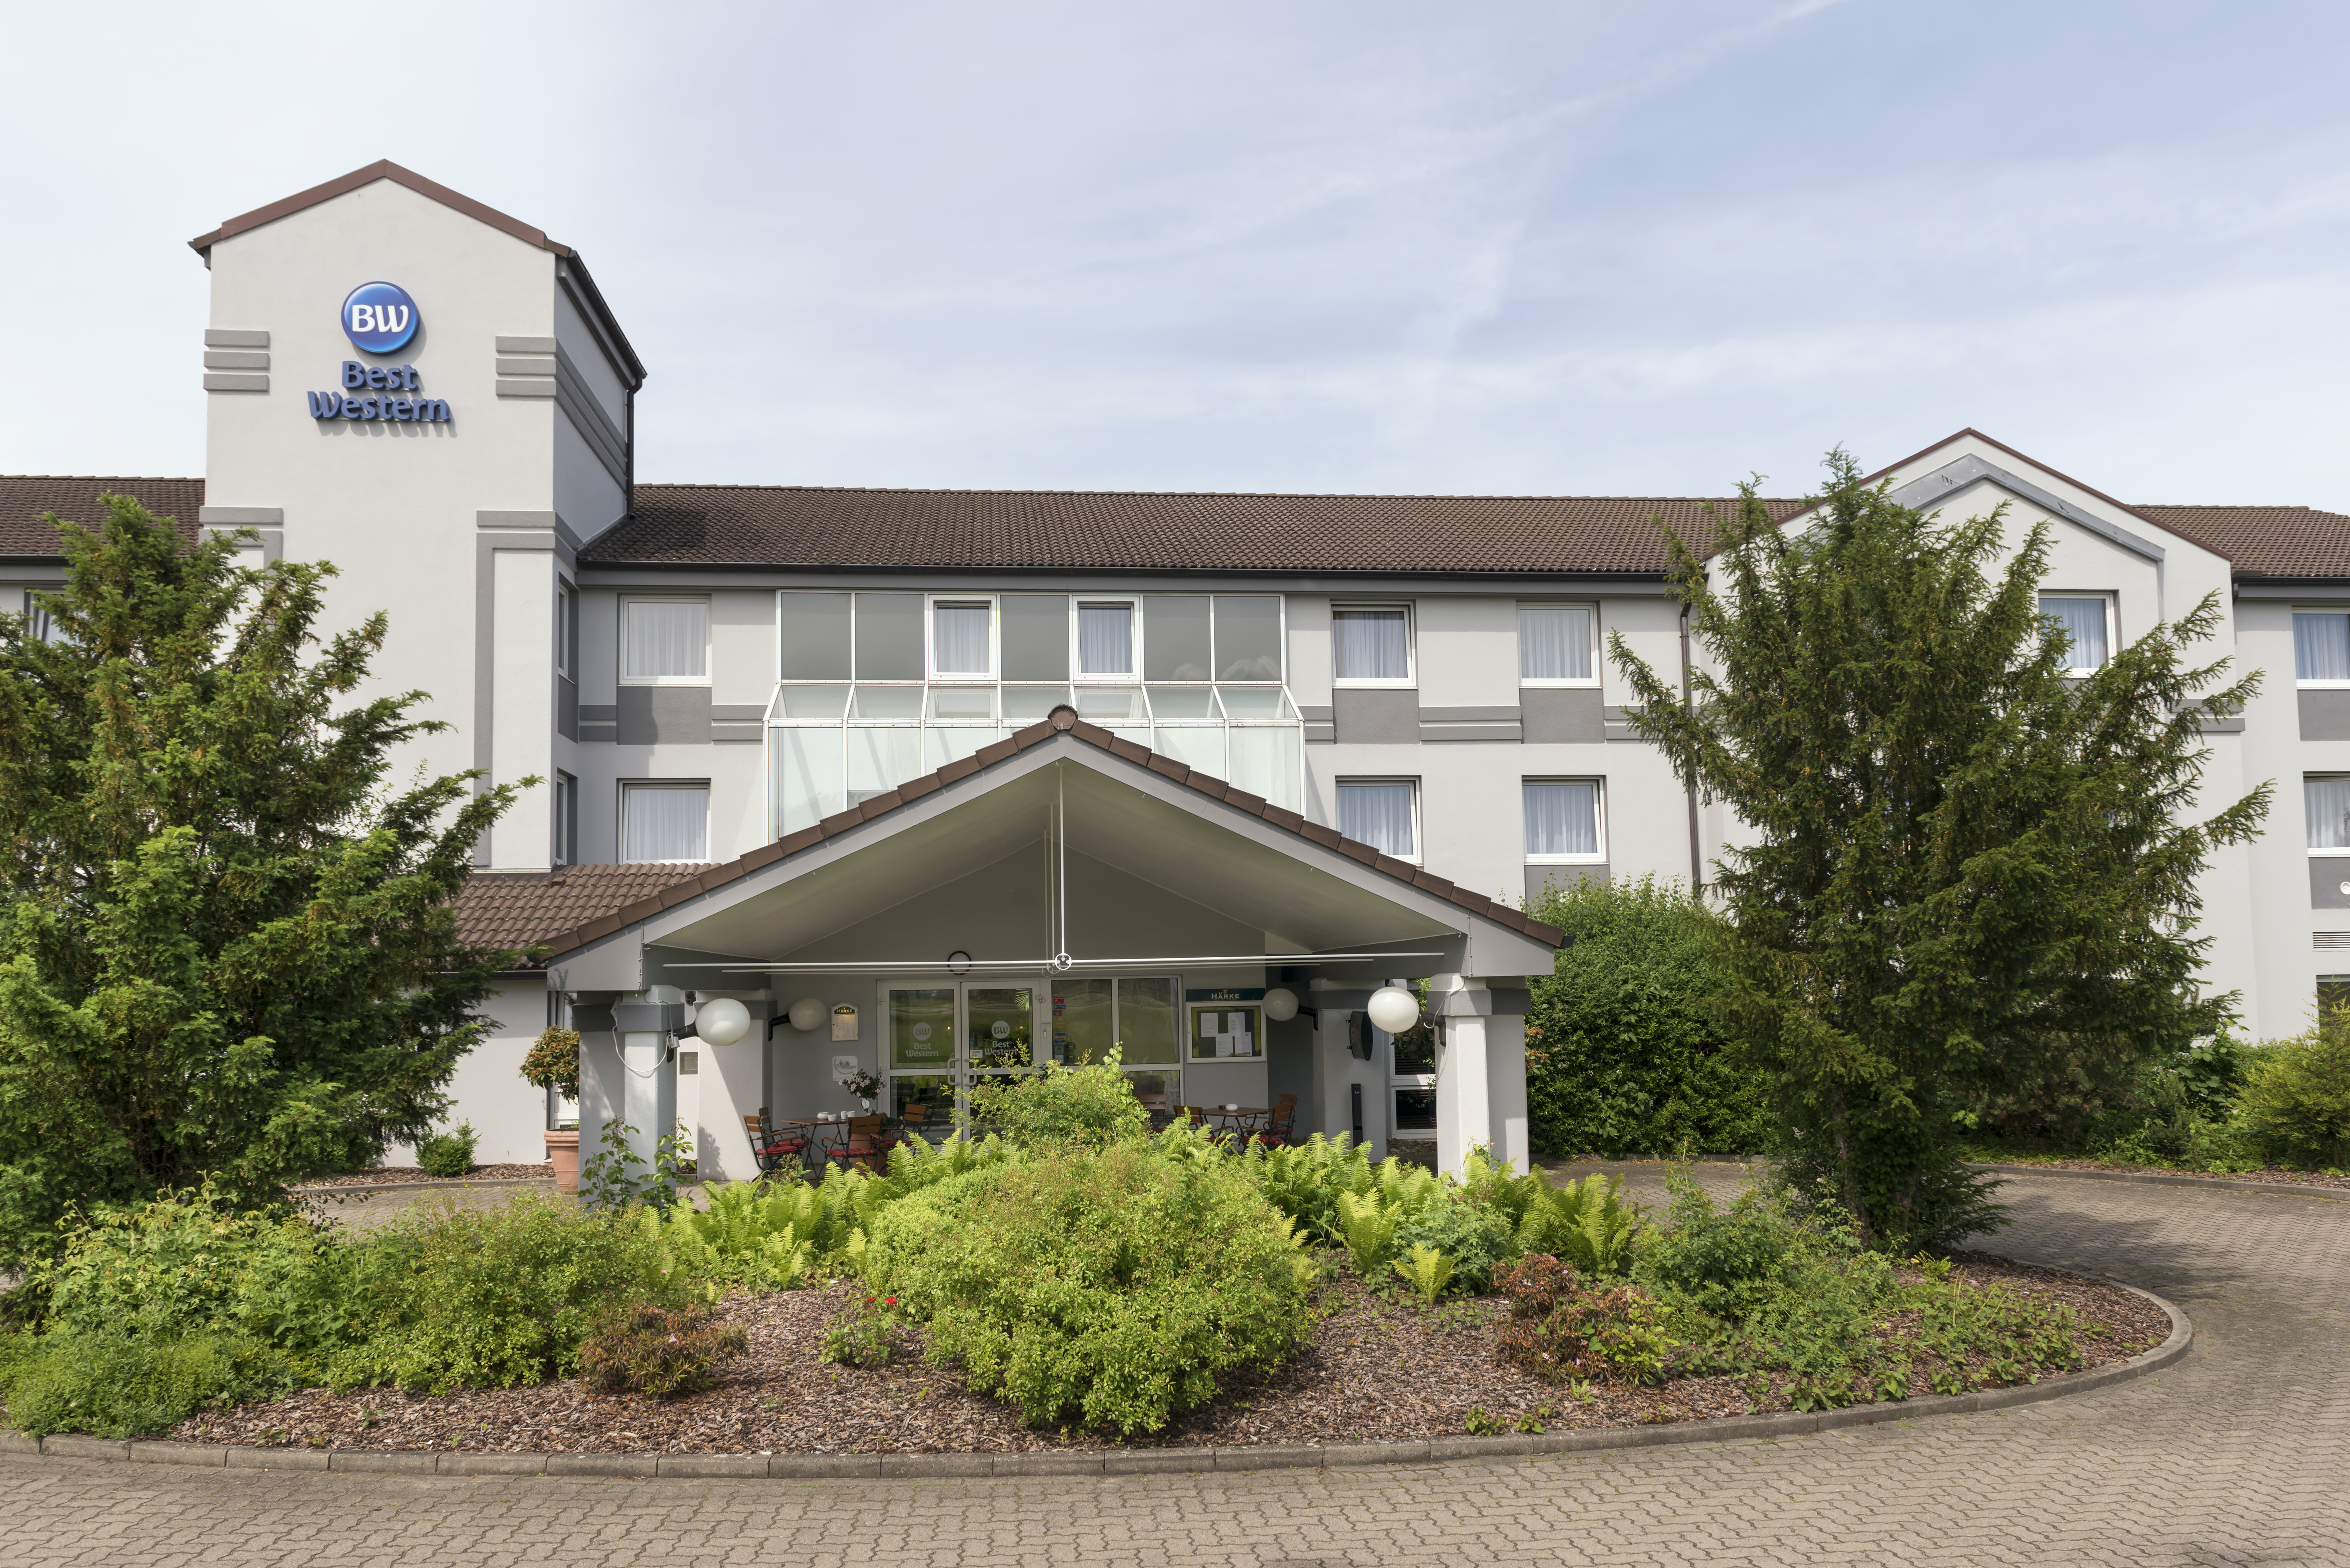 Best Western Hotel Peine-Salzgitter <br/>56.00 ew <br/> <a href='http://vakantieoplossing.nl/outpage/?id=af496ea923c4c0179ab15413d946a9be' target='_blank'>View Details</a>